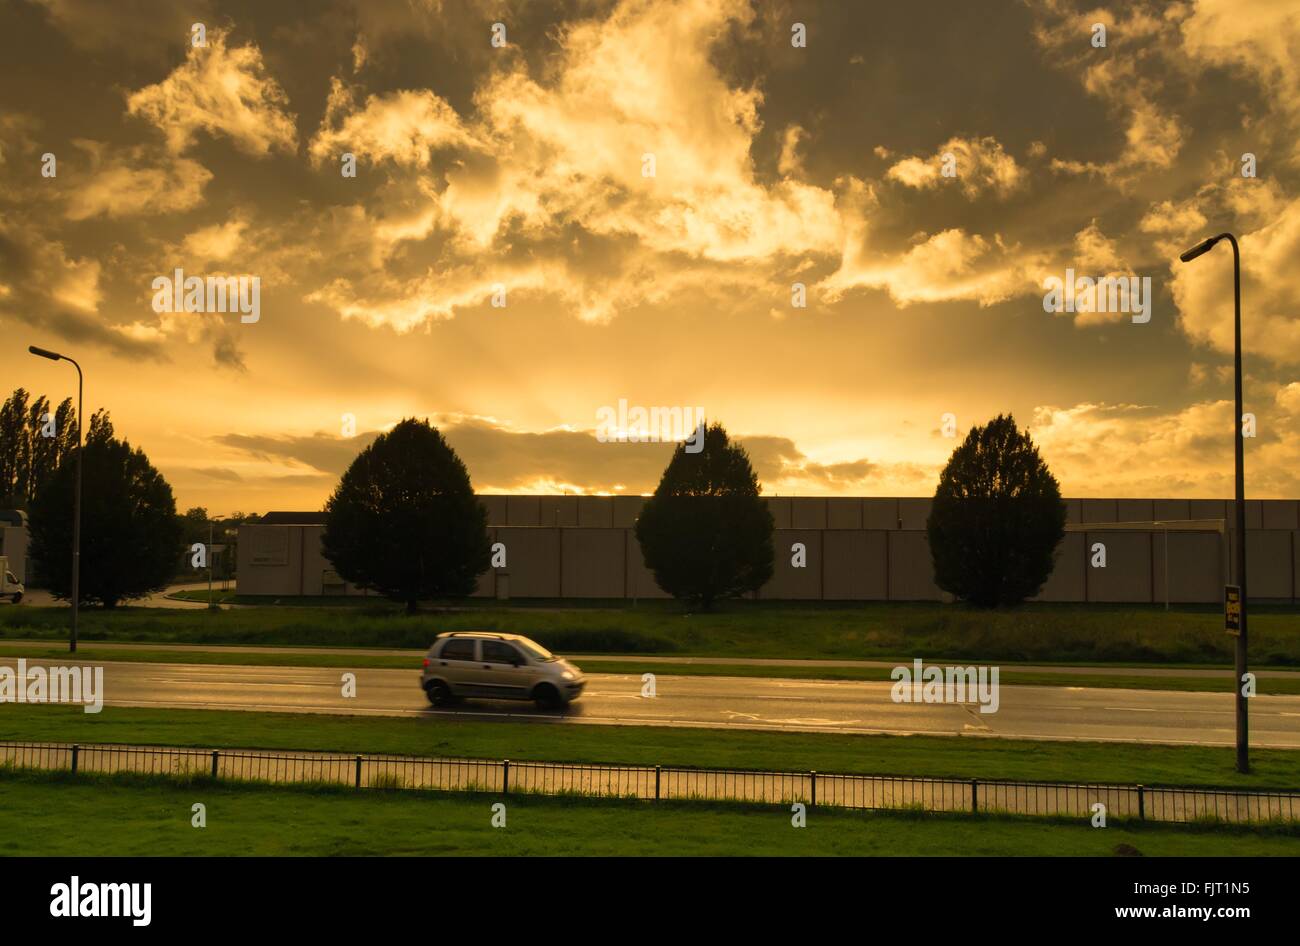 car passing by on a background of some nice copper colored clouds Stock Photo